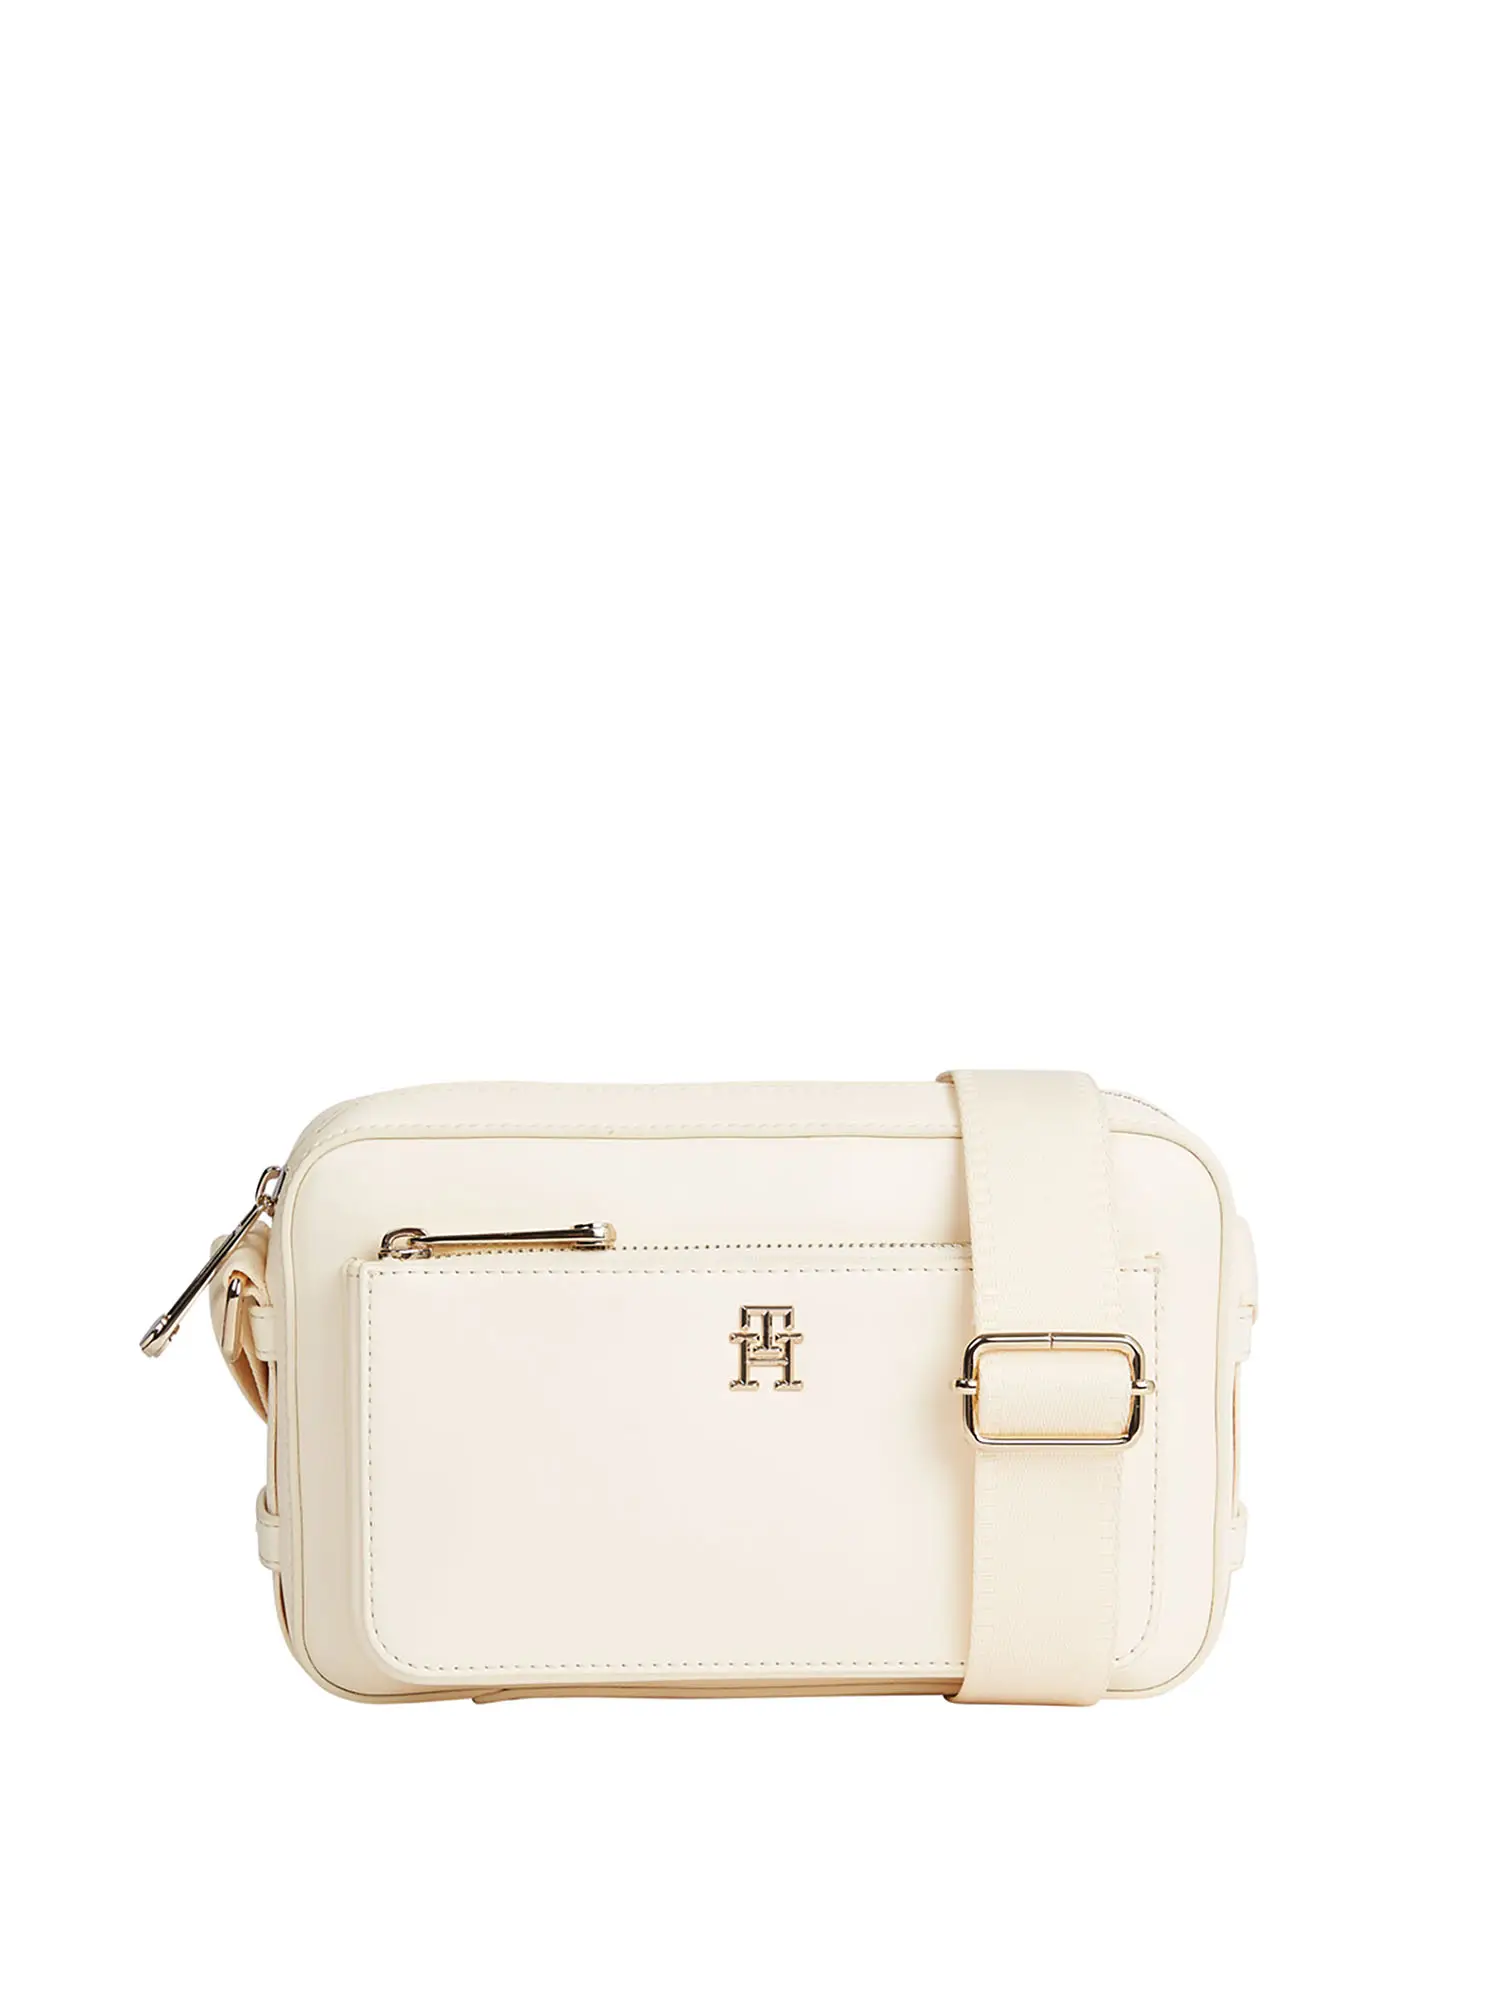 TRACOLLA DONNA - TOMMY HILFIGER - AW0AW15991 - BIANCO, UNICA